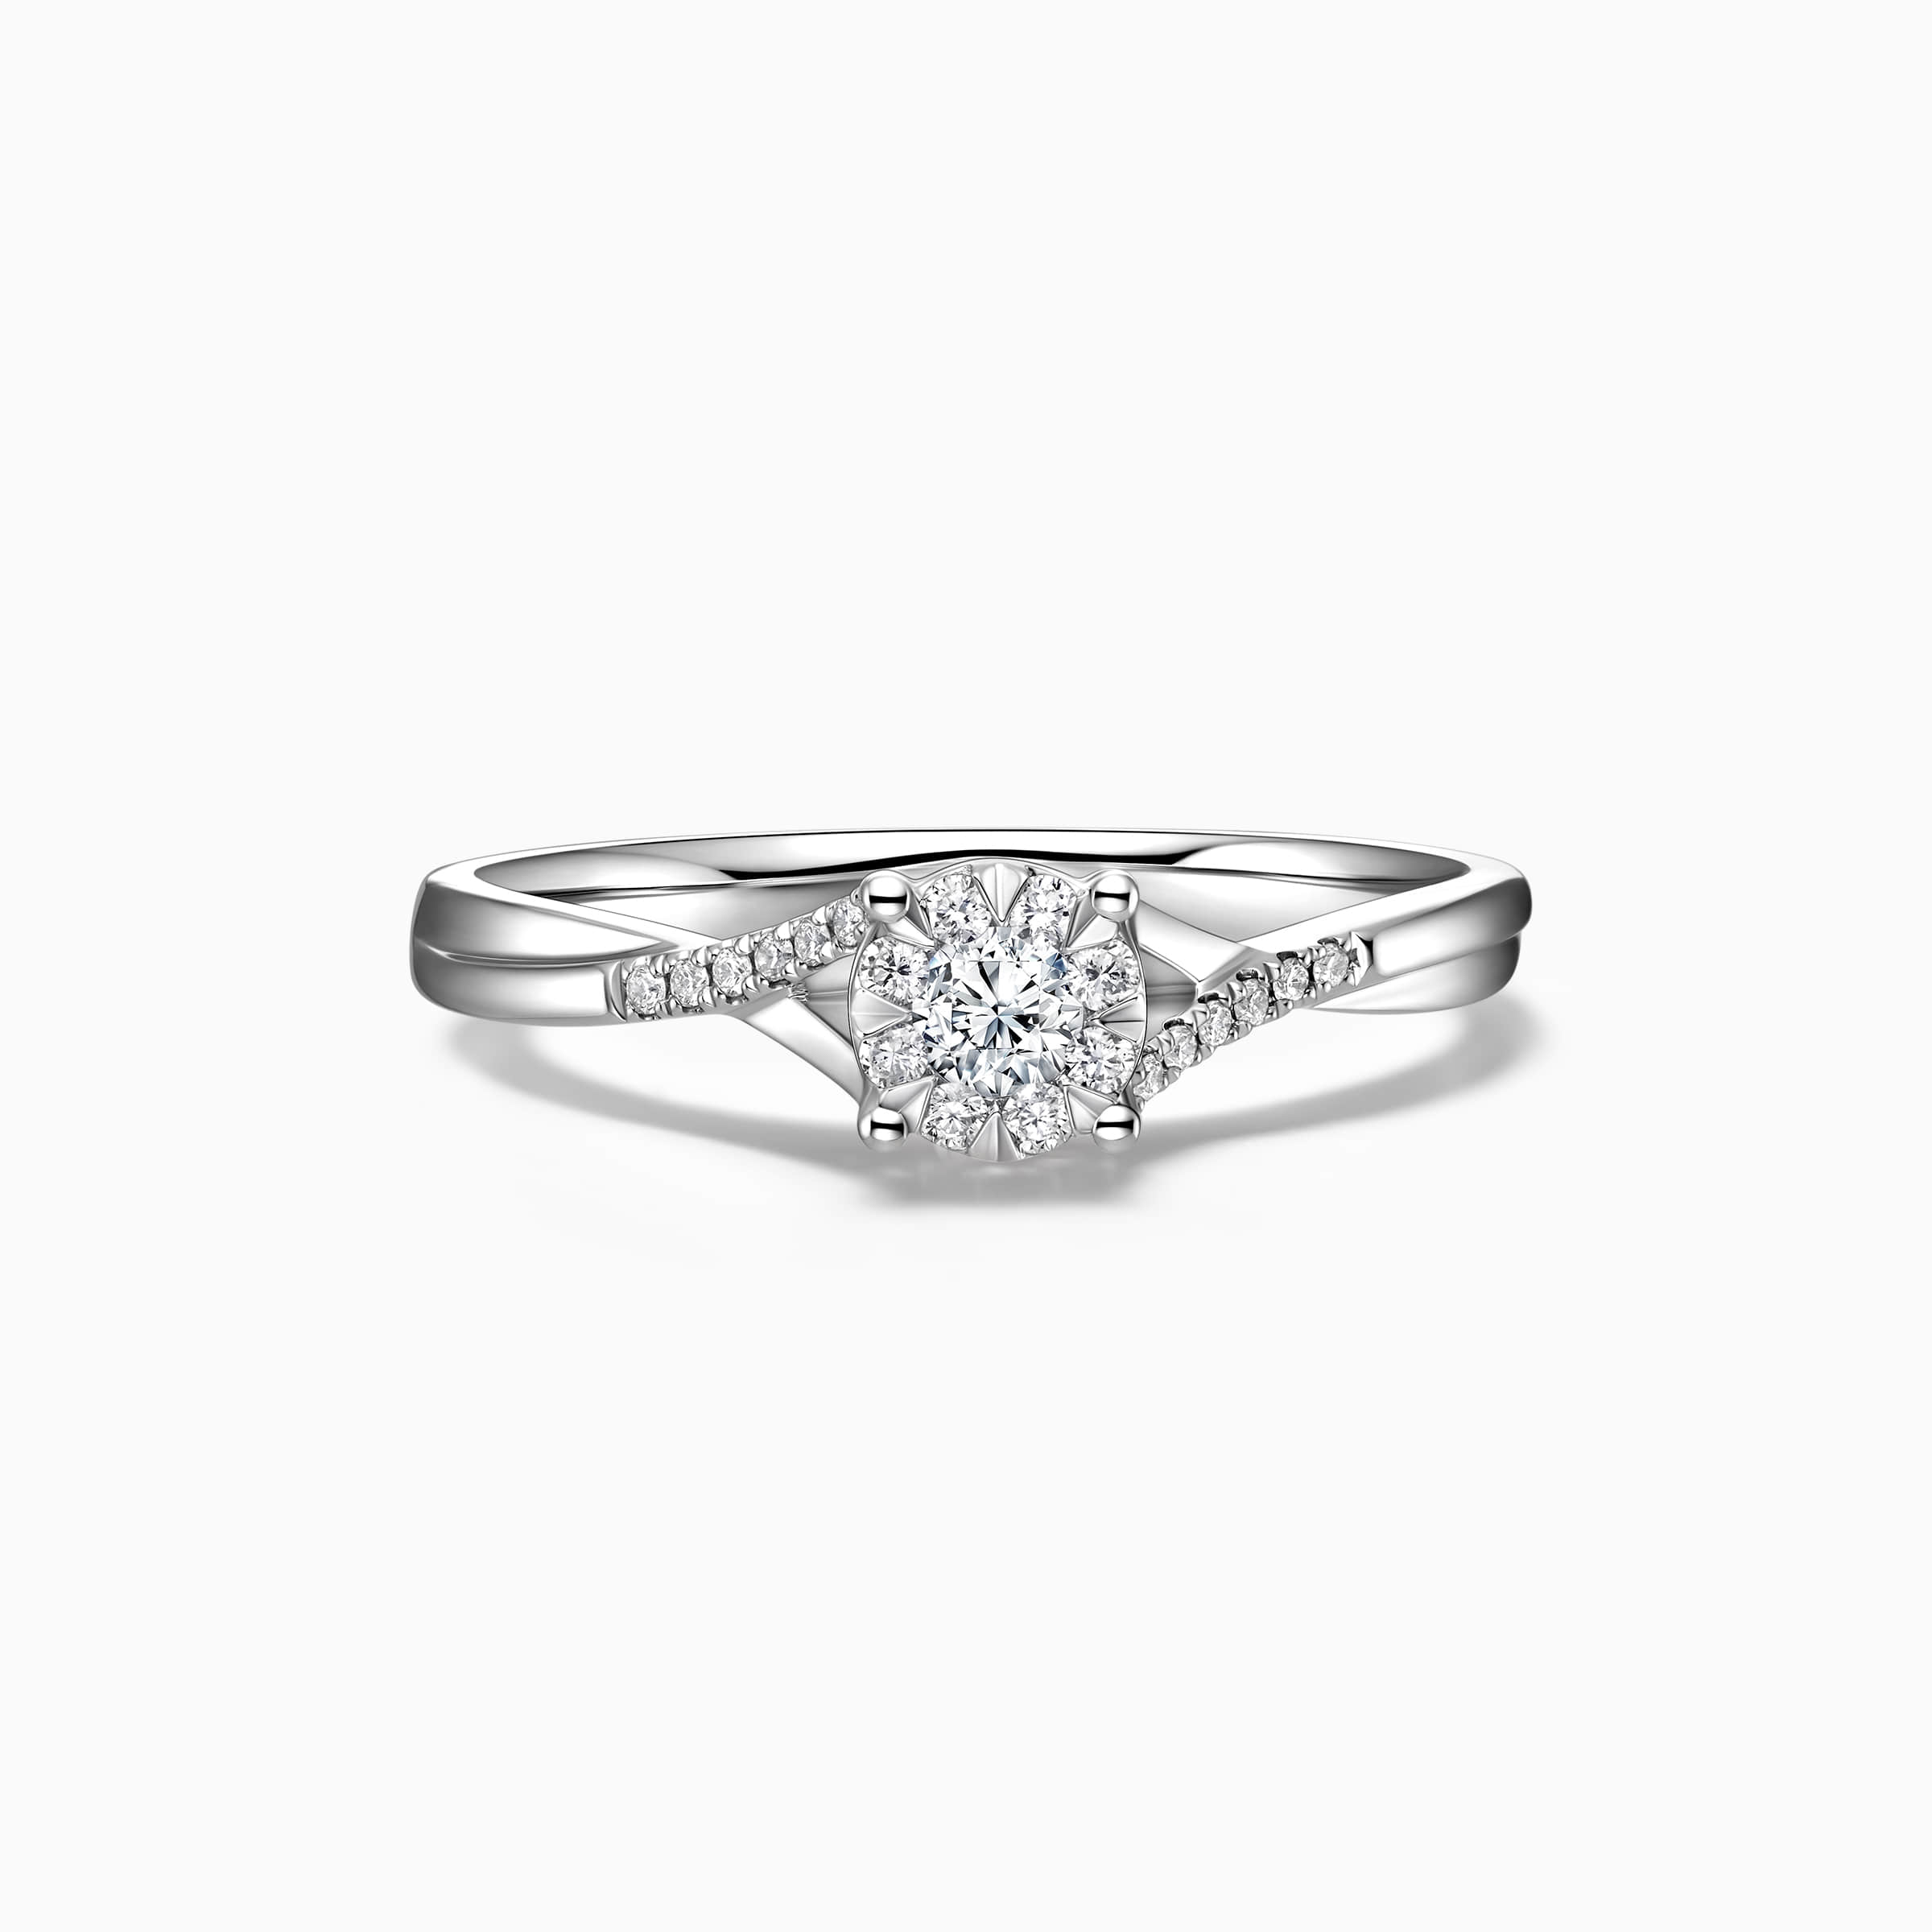 Darry Ring dainty promise ring front view